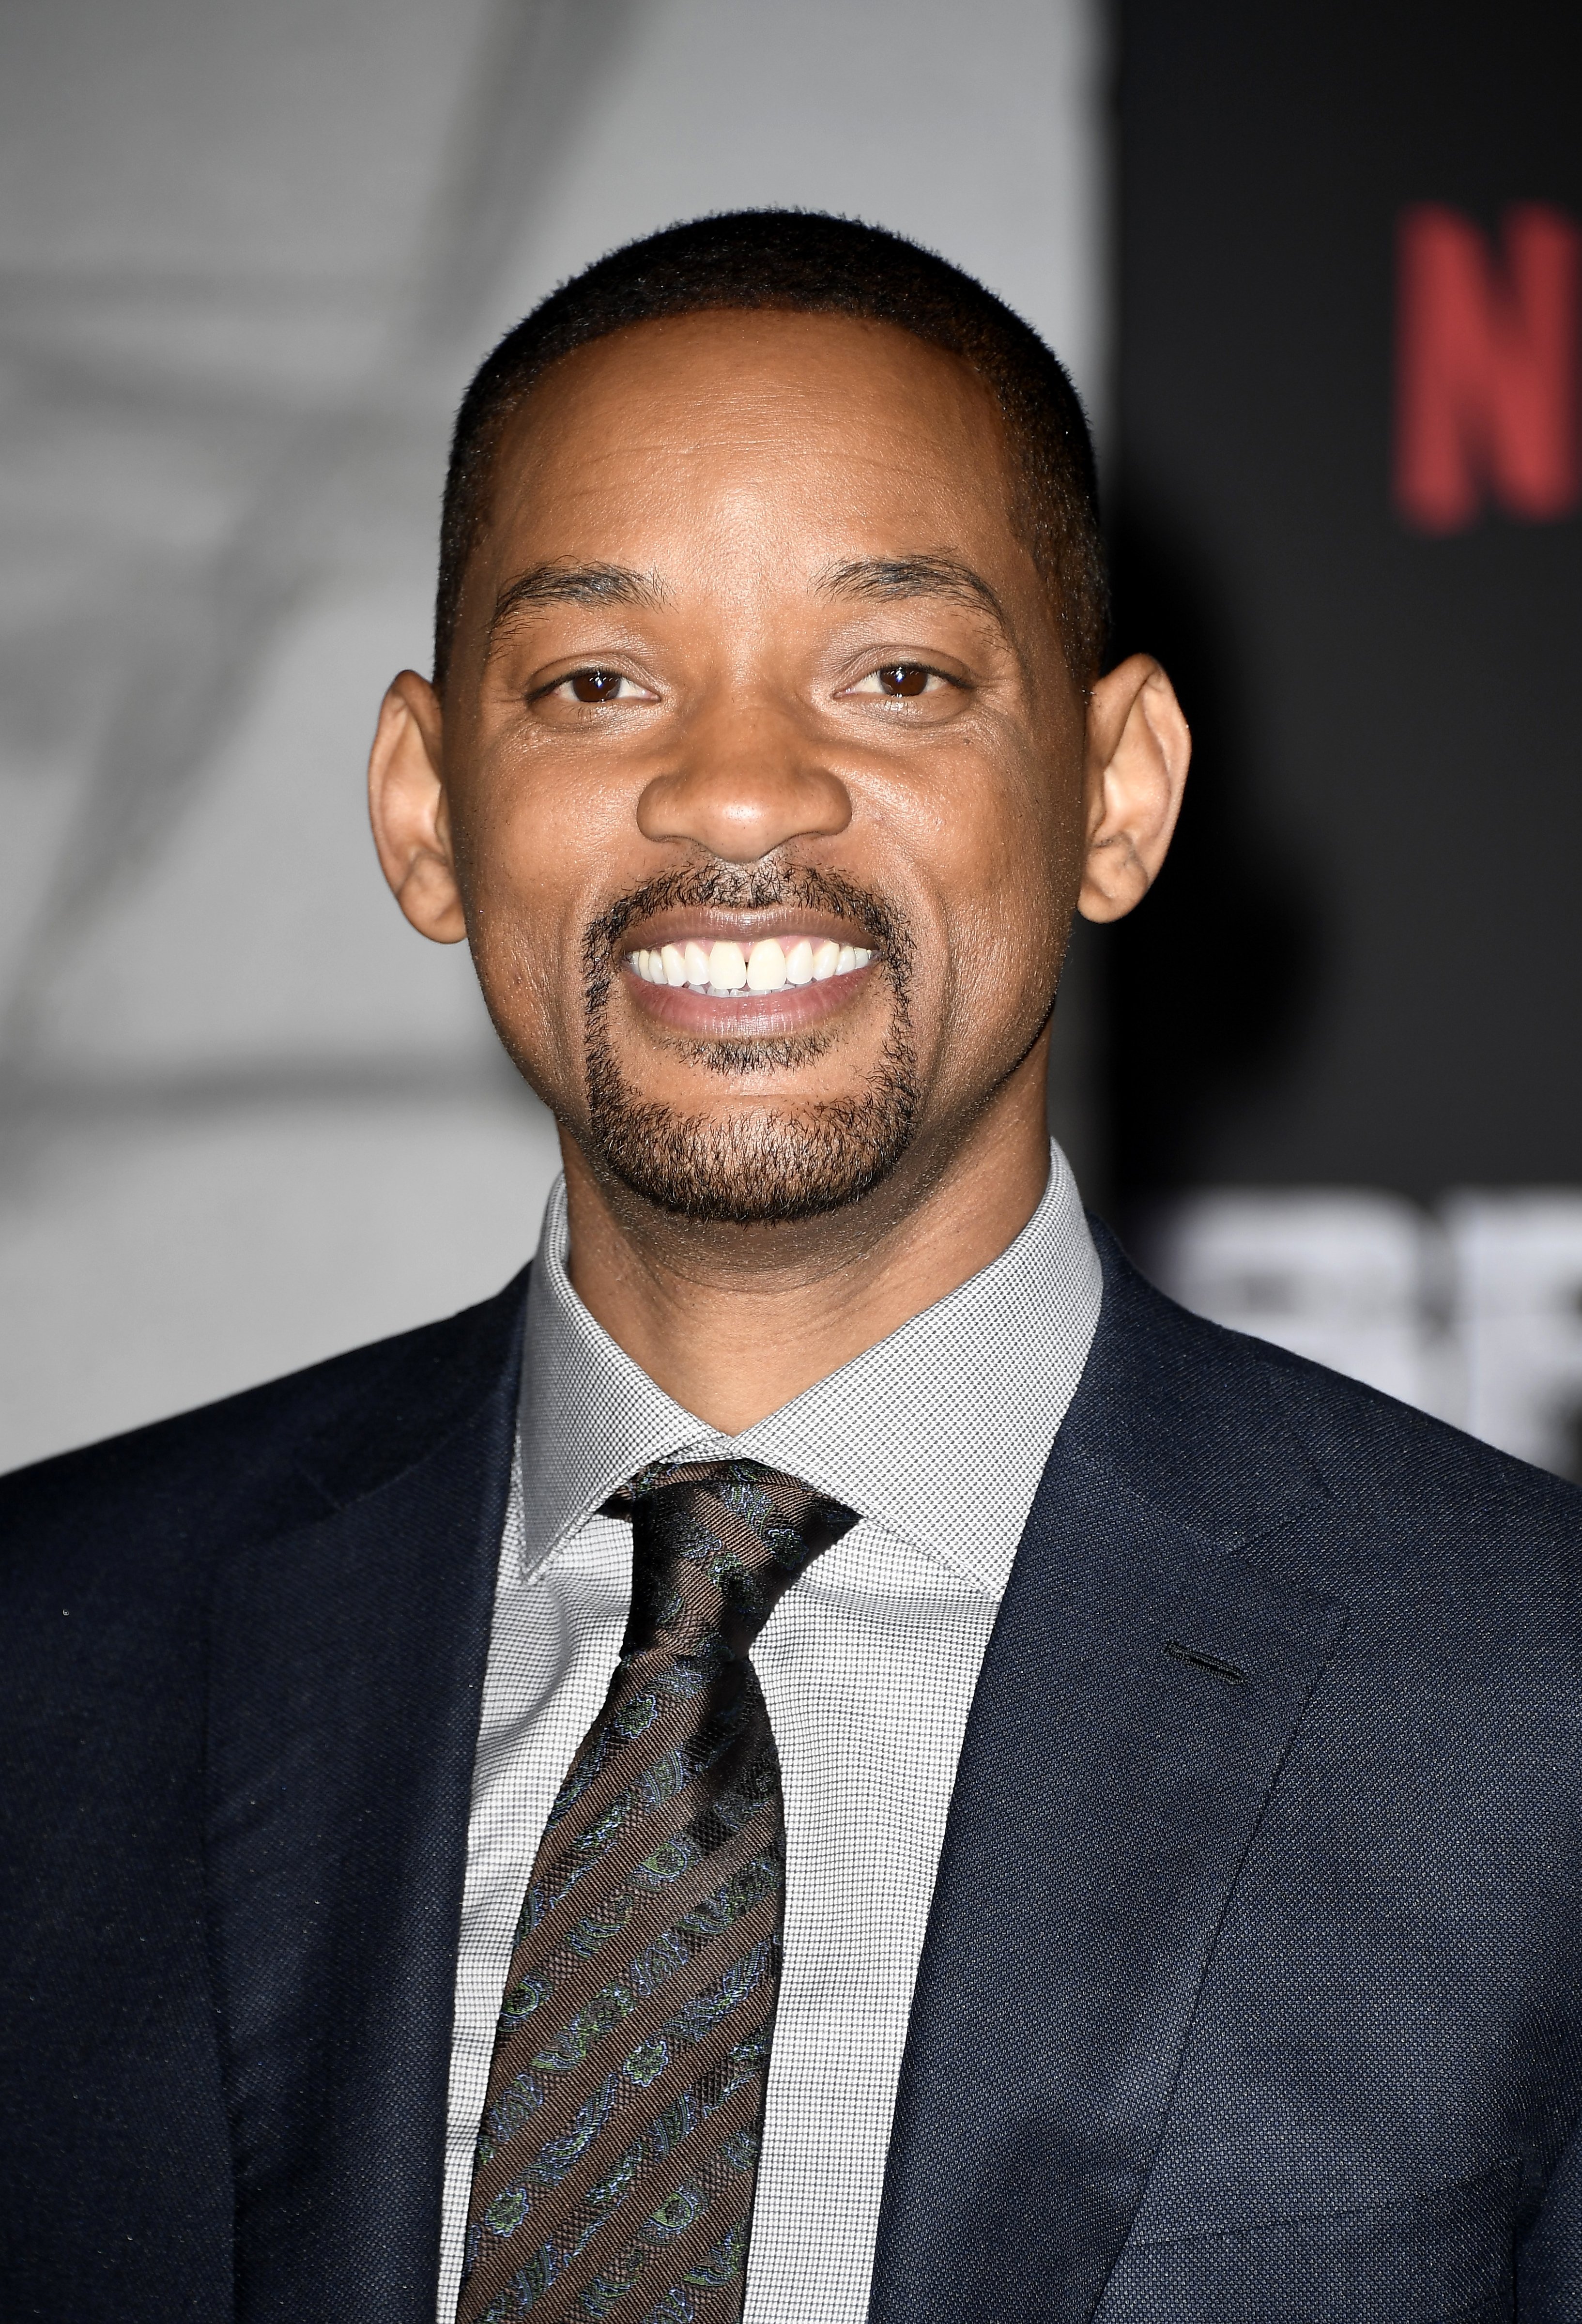 Will Smith at the Premiere Of "Bright" in Westwood, California on Dec. 13, 2017 | Photo: Getty Images